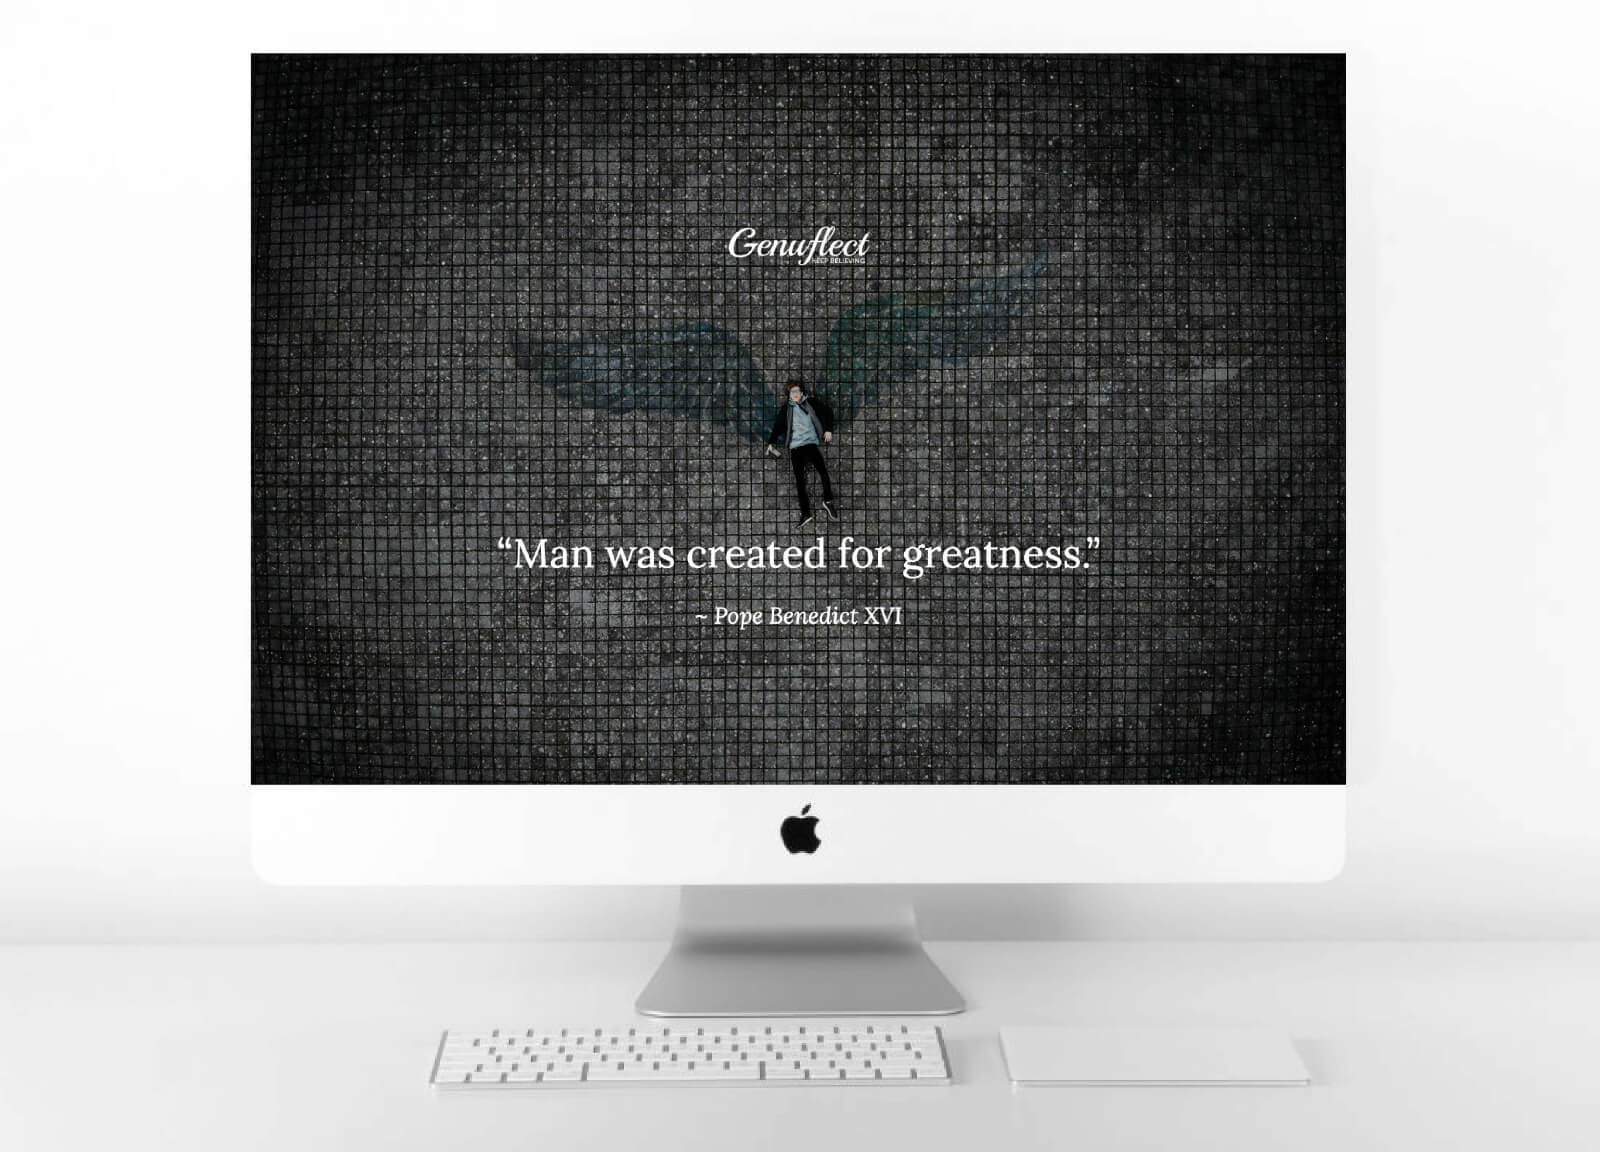 Genuflect computer background image of large angel wings drawn on a dark tile floor with a man in front of the wings